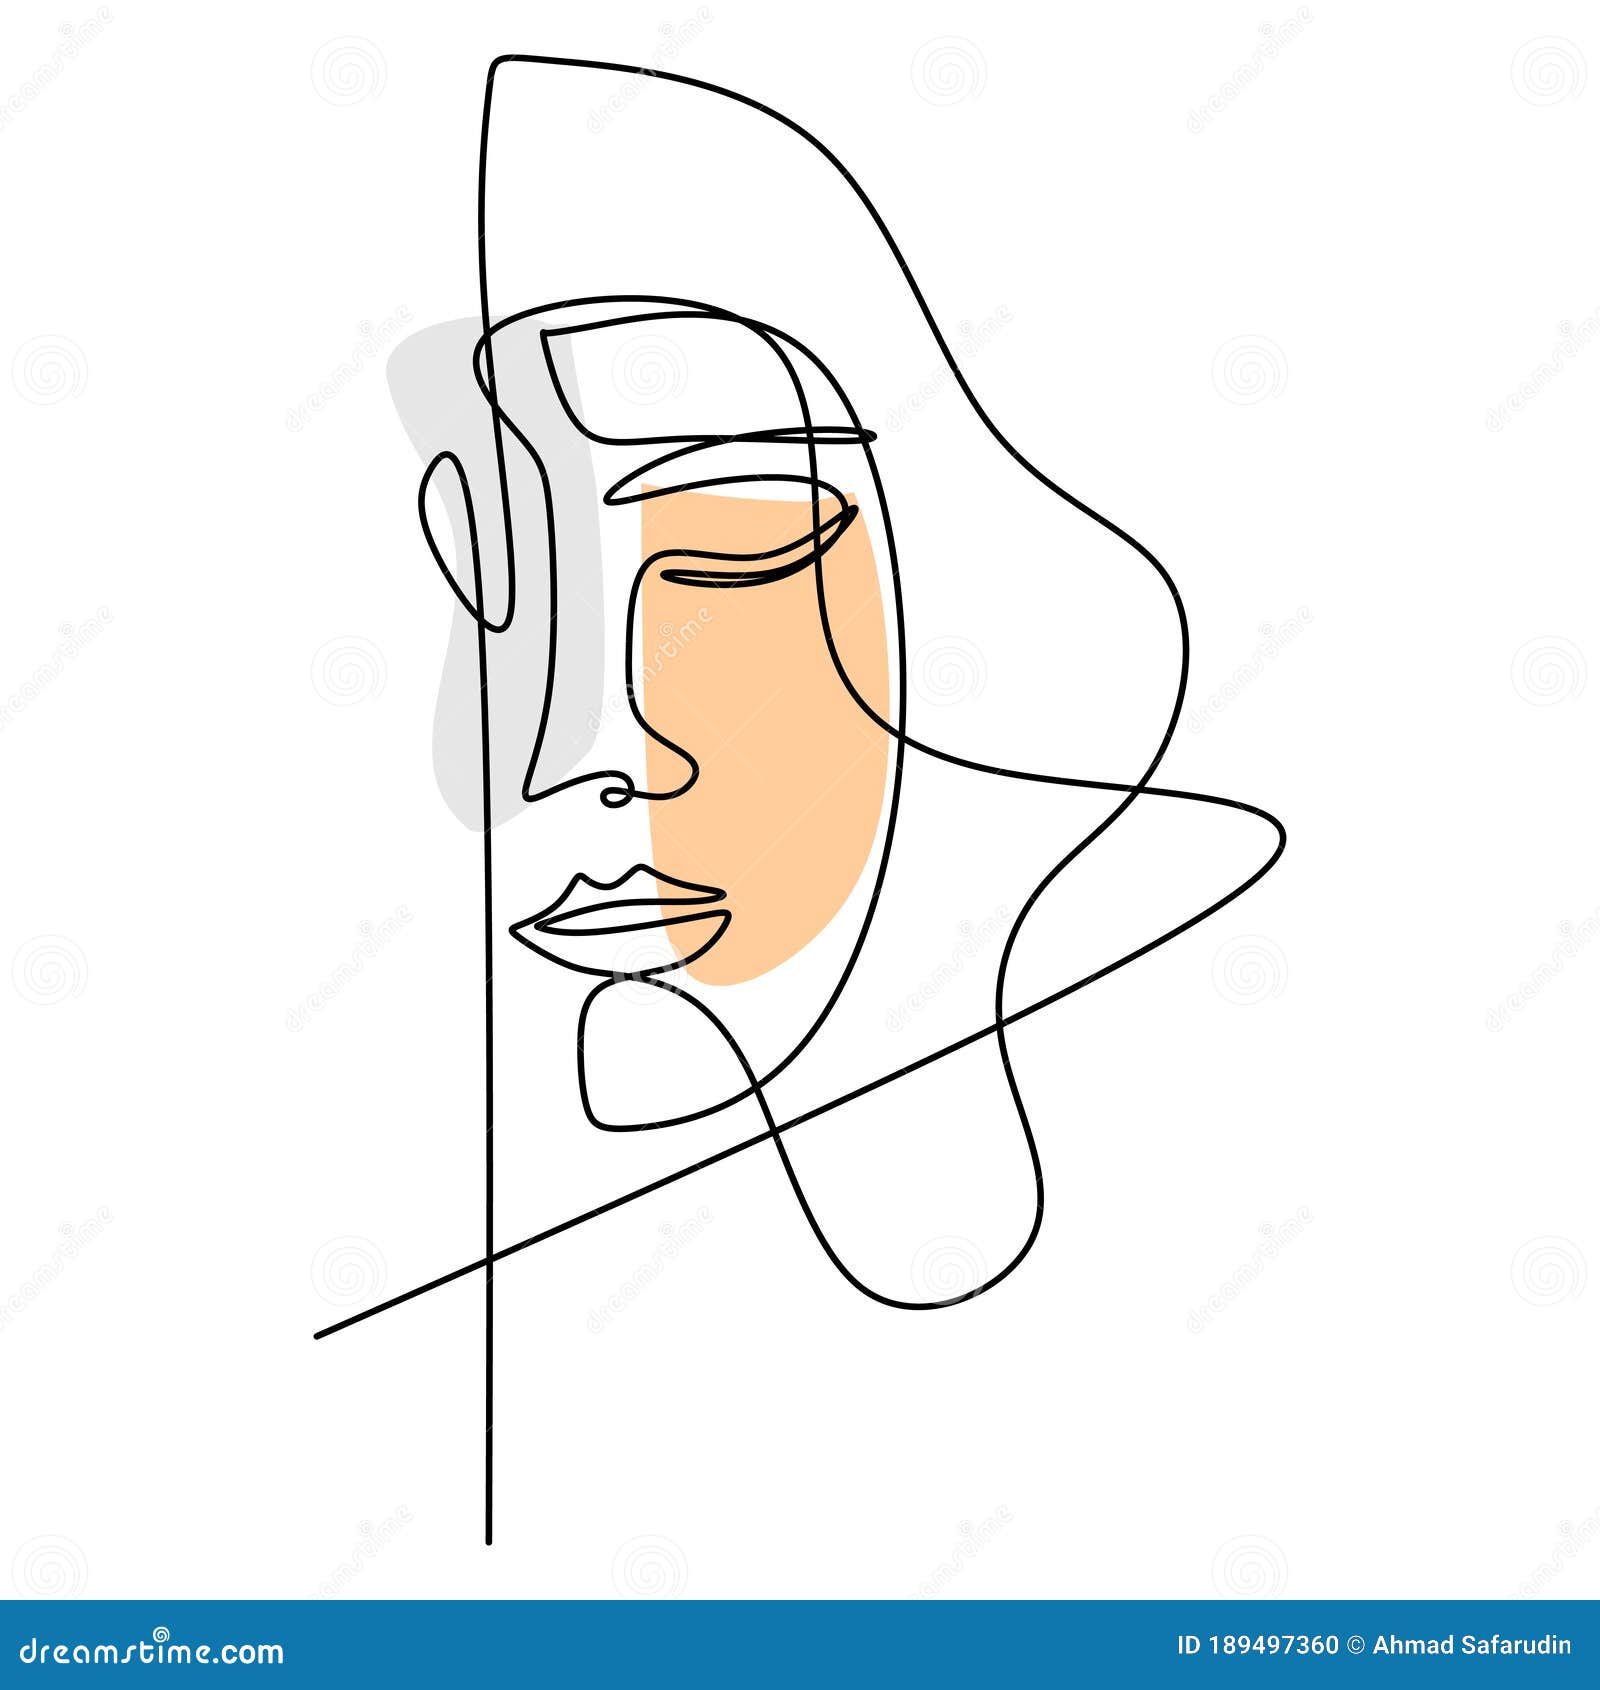 One Line Art Minimal Face Drawing Abstract Female Face Sketch Art Woman